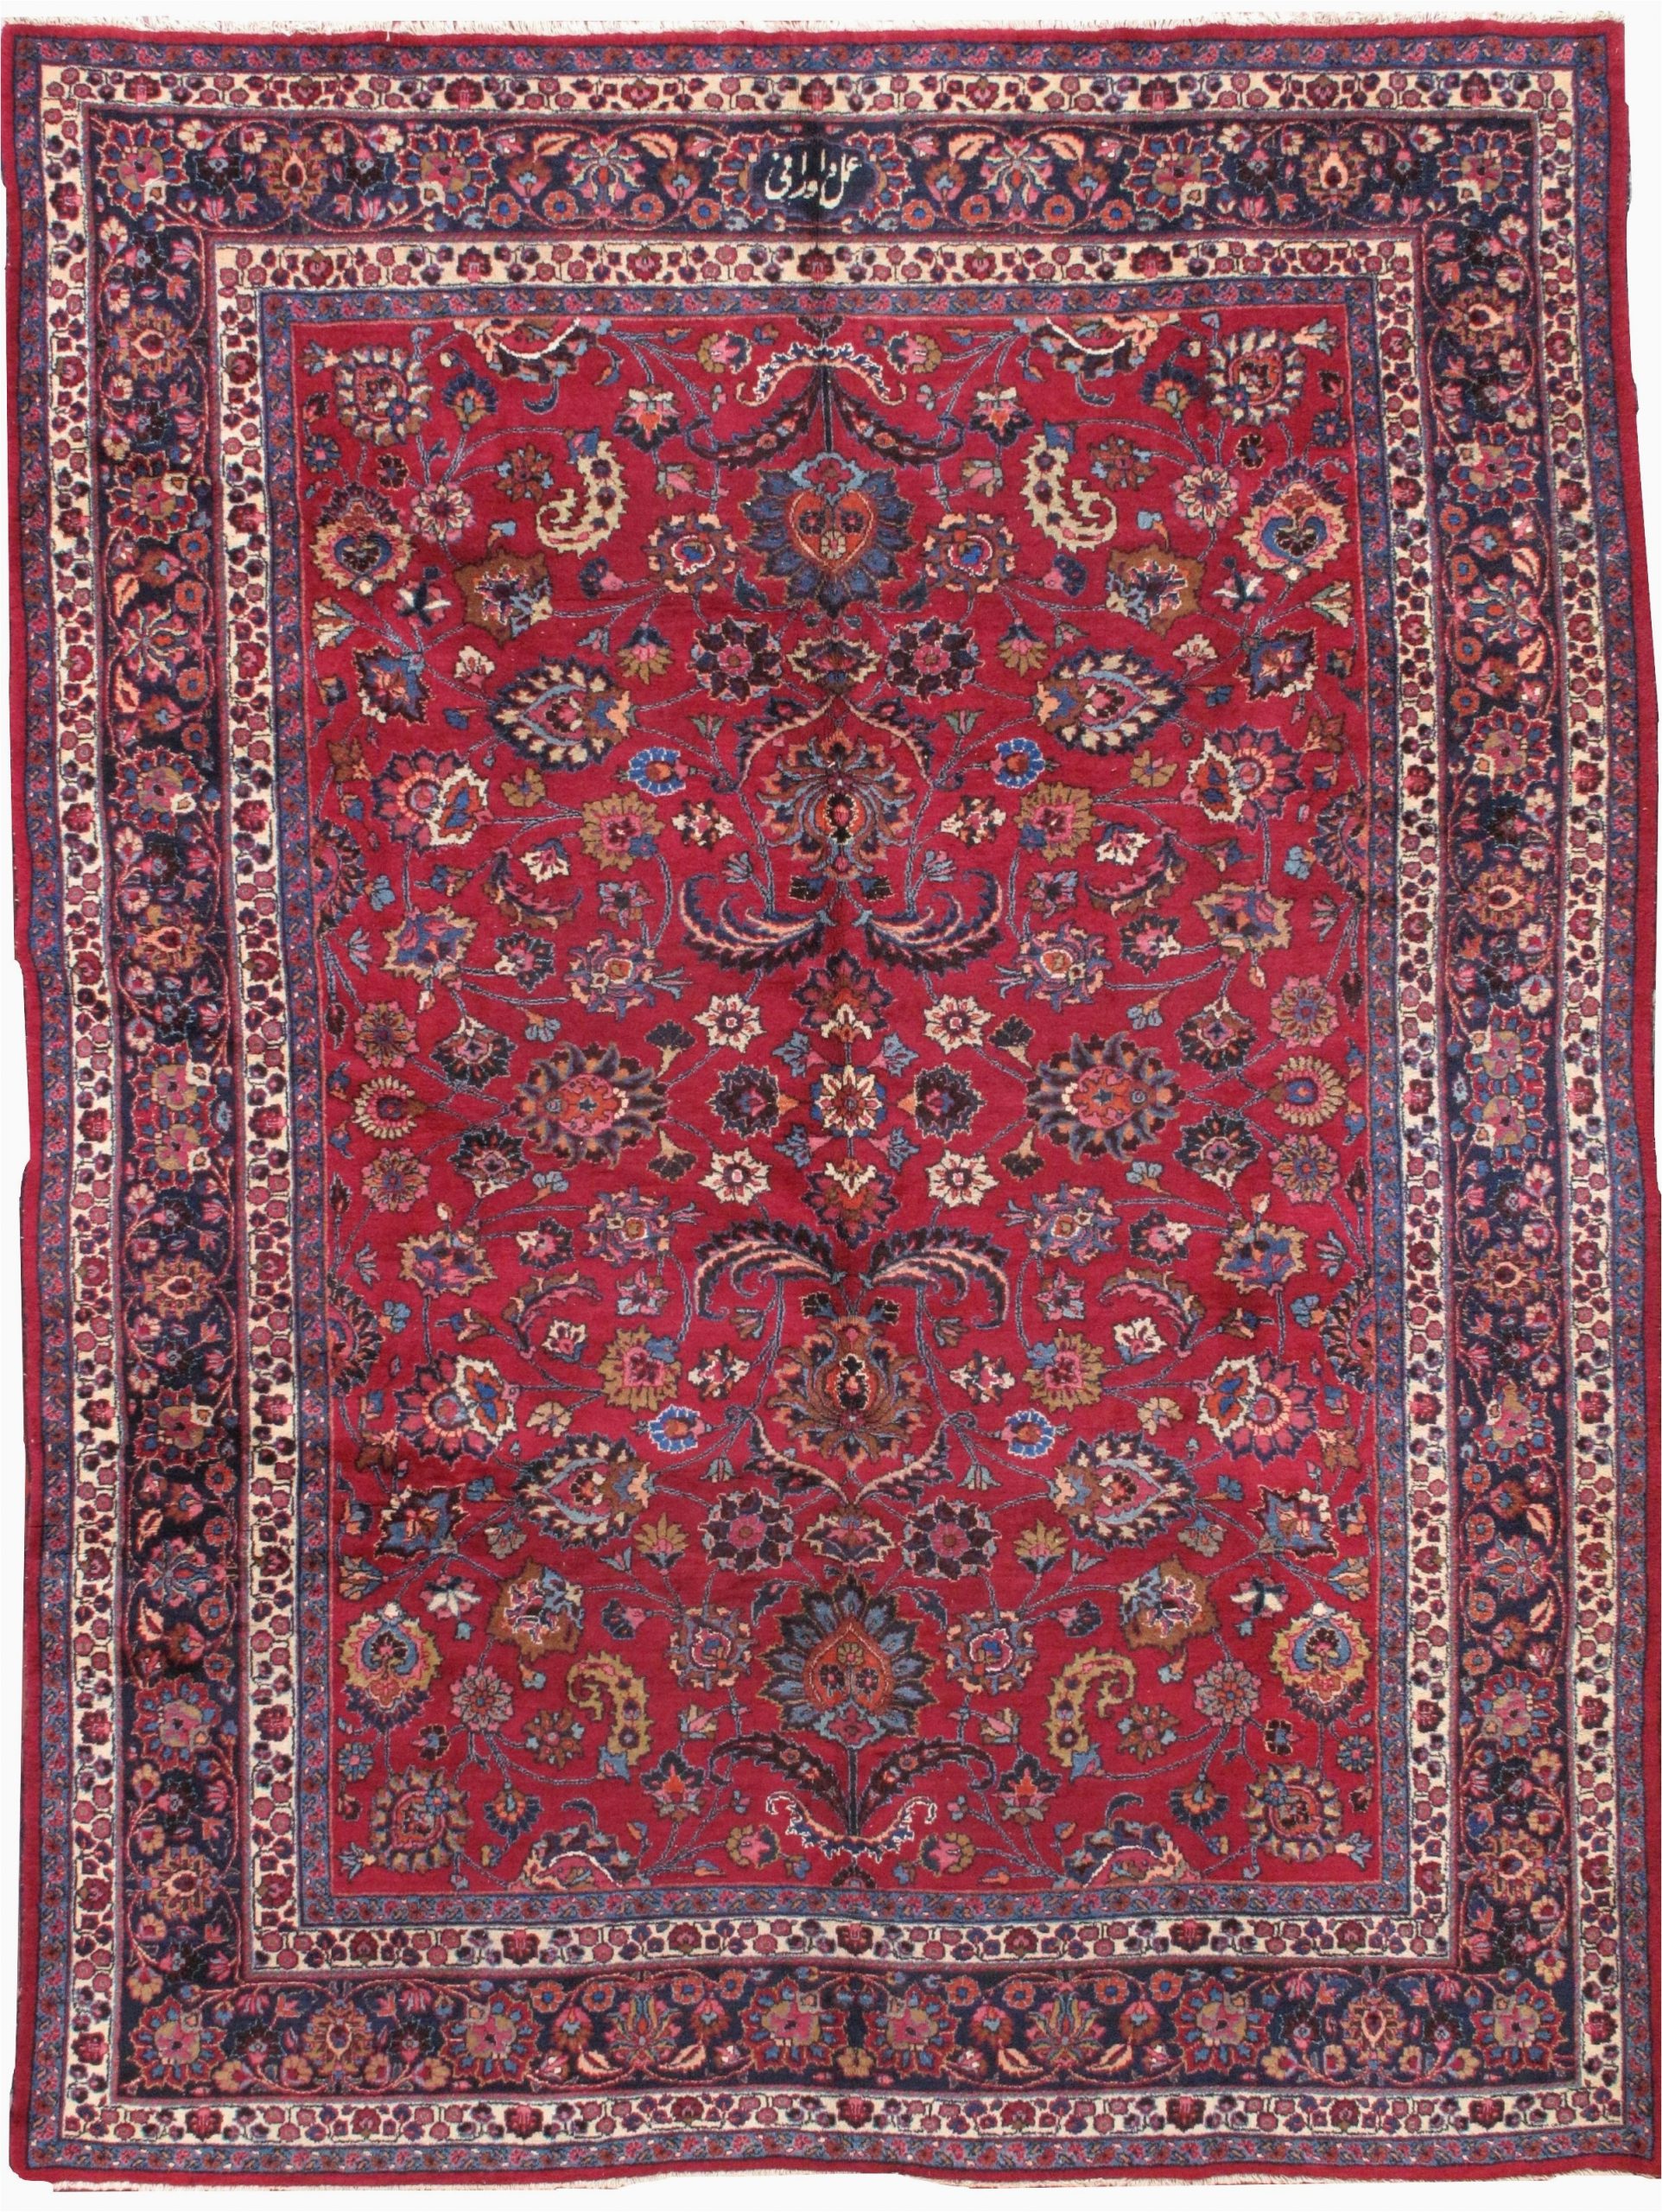 Navy Blue and Red Rug Handmade Antique Persian Mashad Red Rug In 2020 Rugs Red